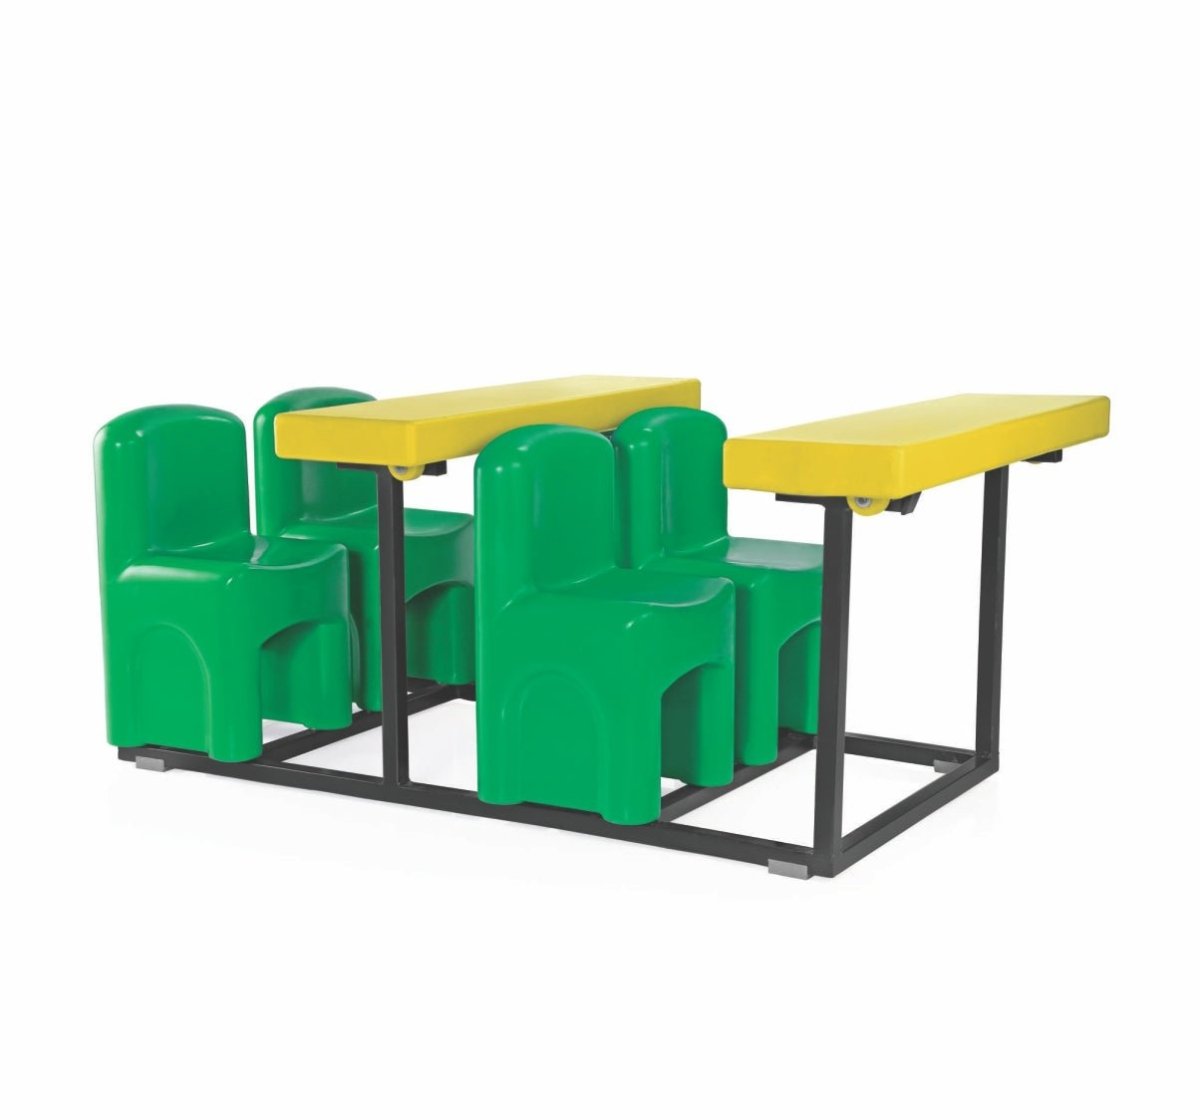 Ok Play Fabulous Four, Chair and Table - Yellow & Green - FTFF000633